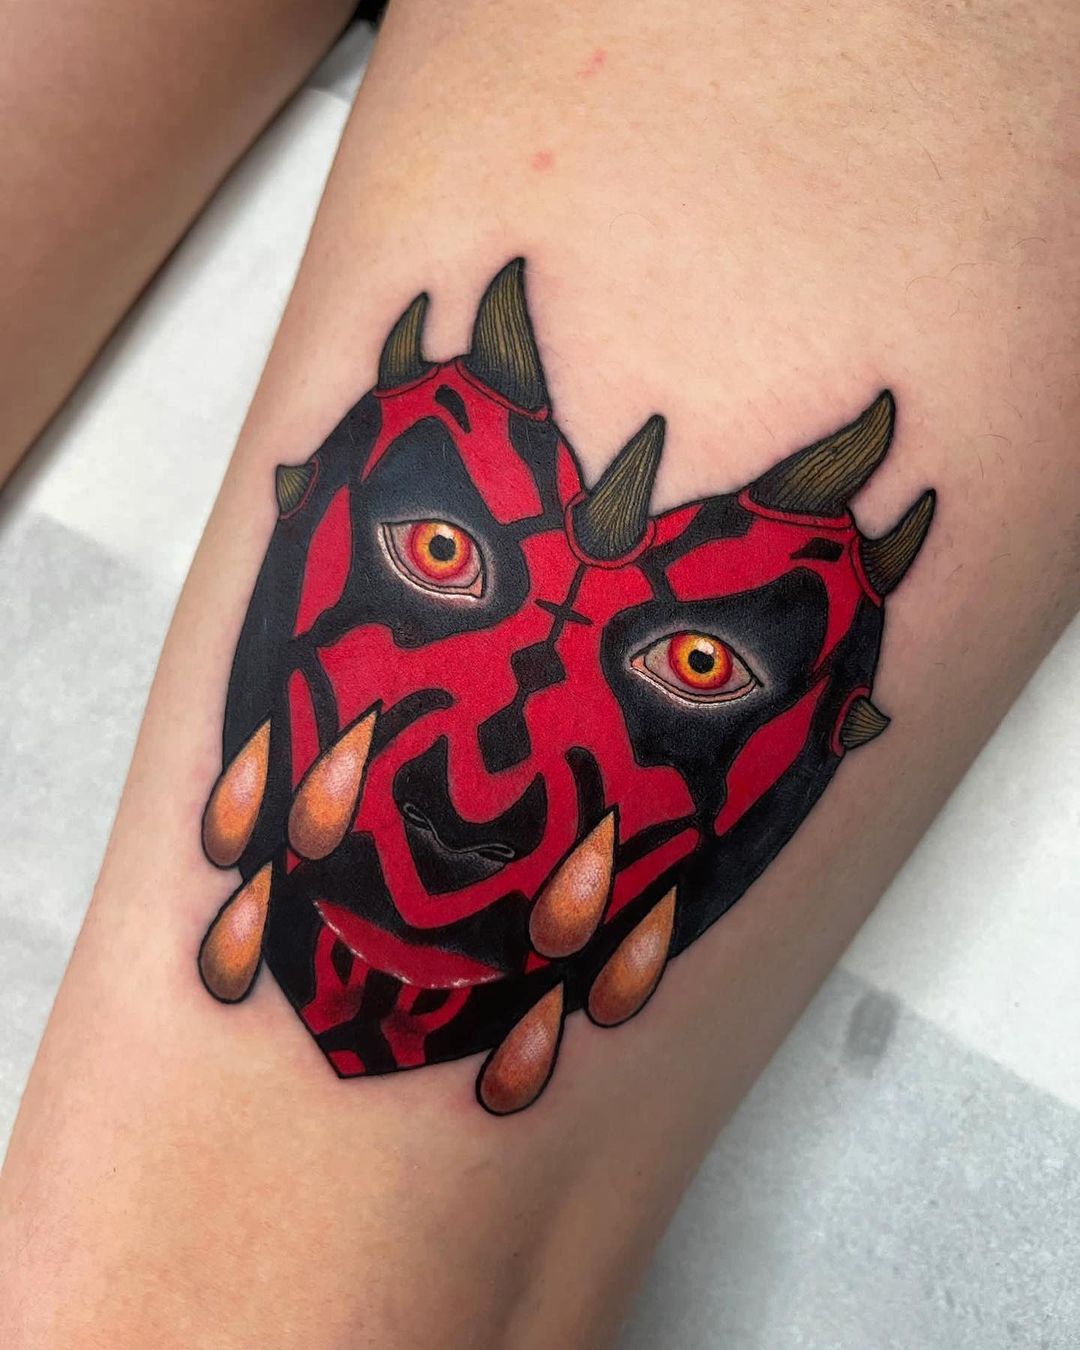 17 Darth Maul Tattoos that will inspire you!